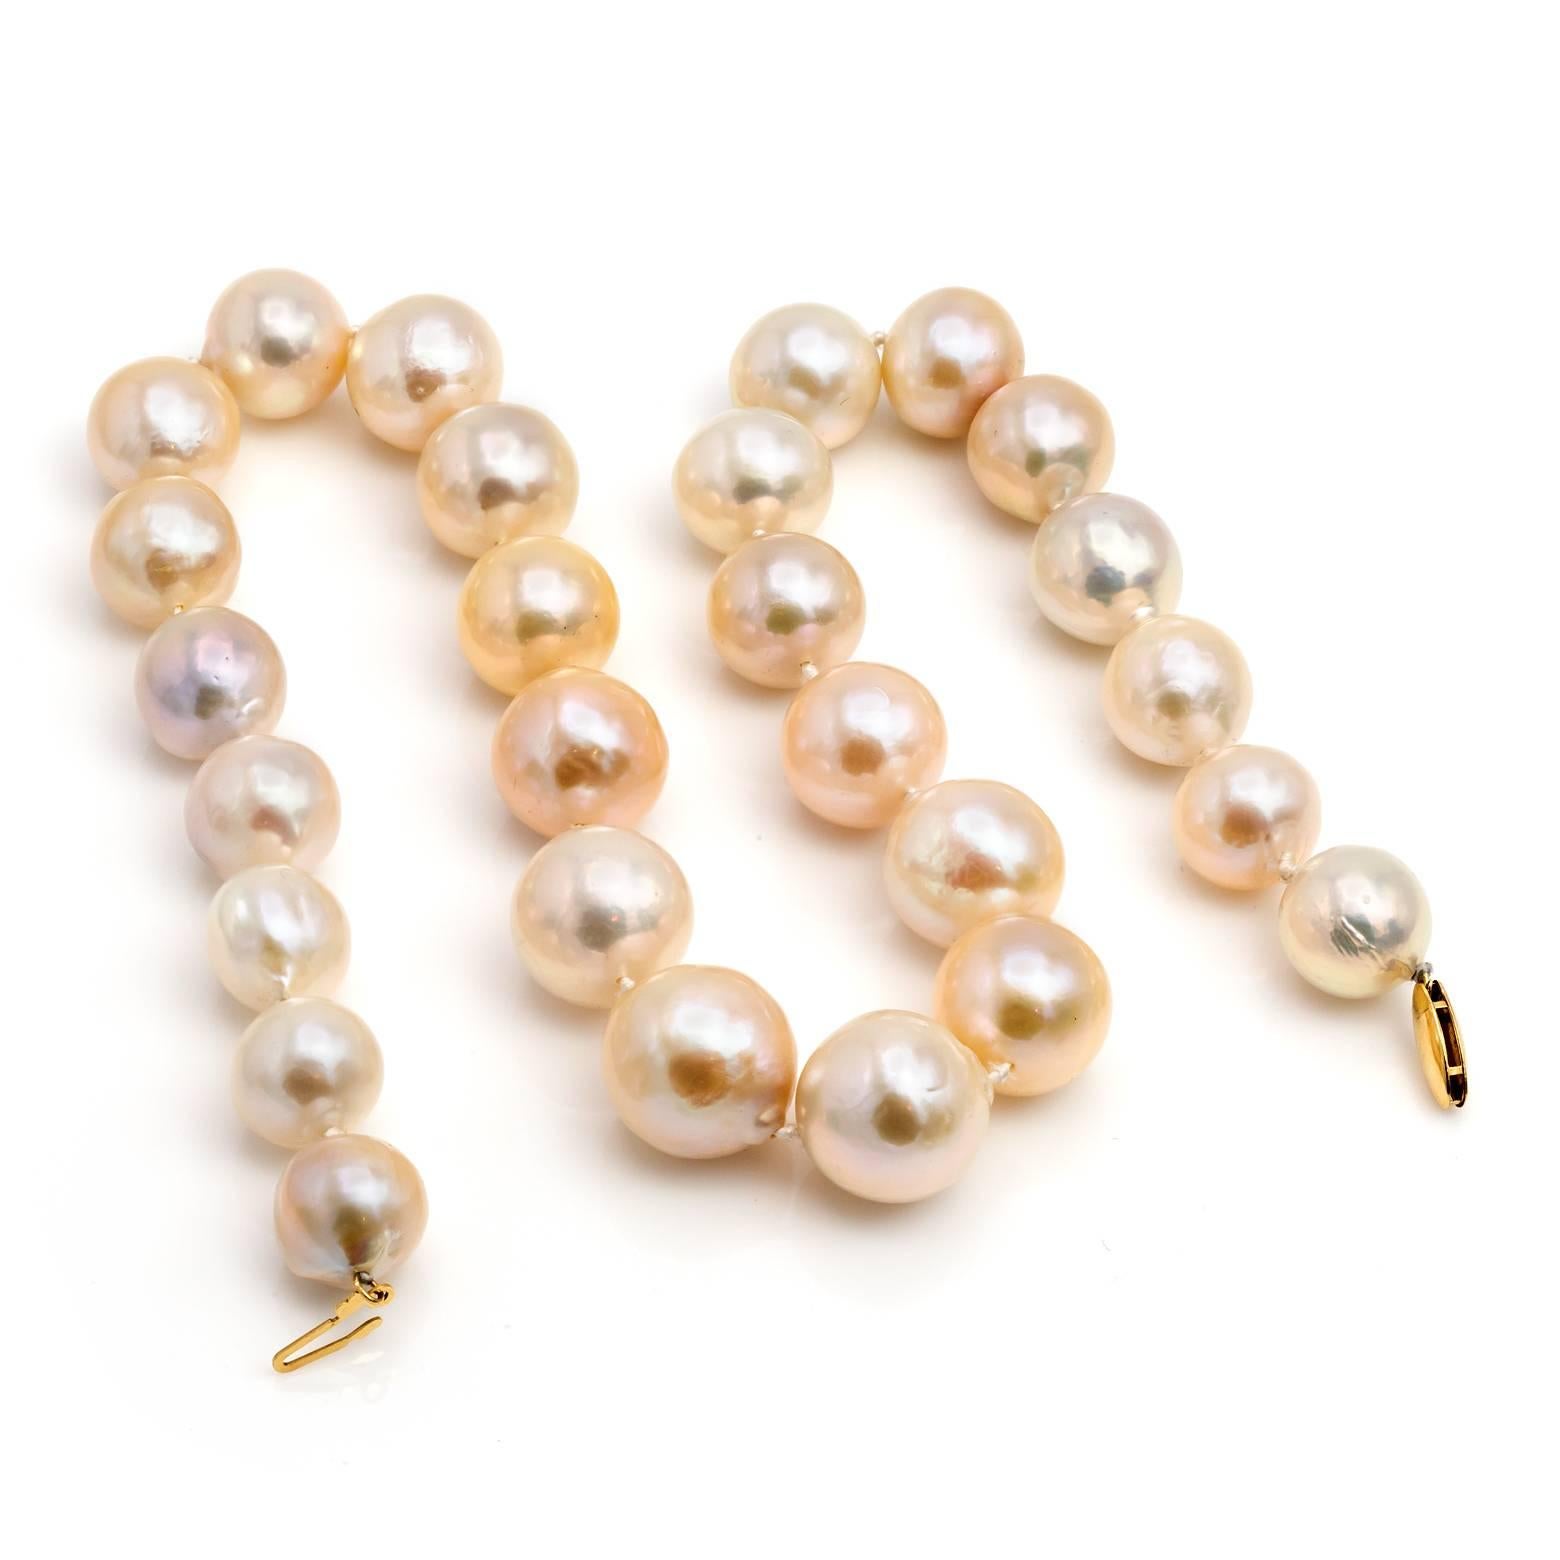 Contemporary Large Fresh Water Pearl Necklace in Light Peachy Pink and Silver Hues Gold Clasp